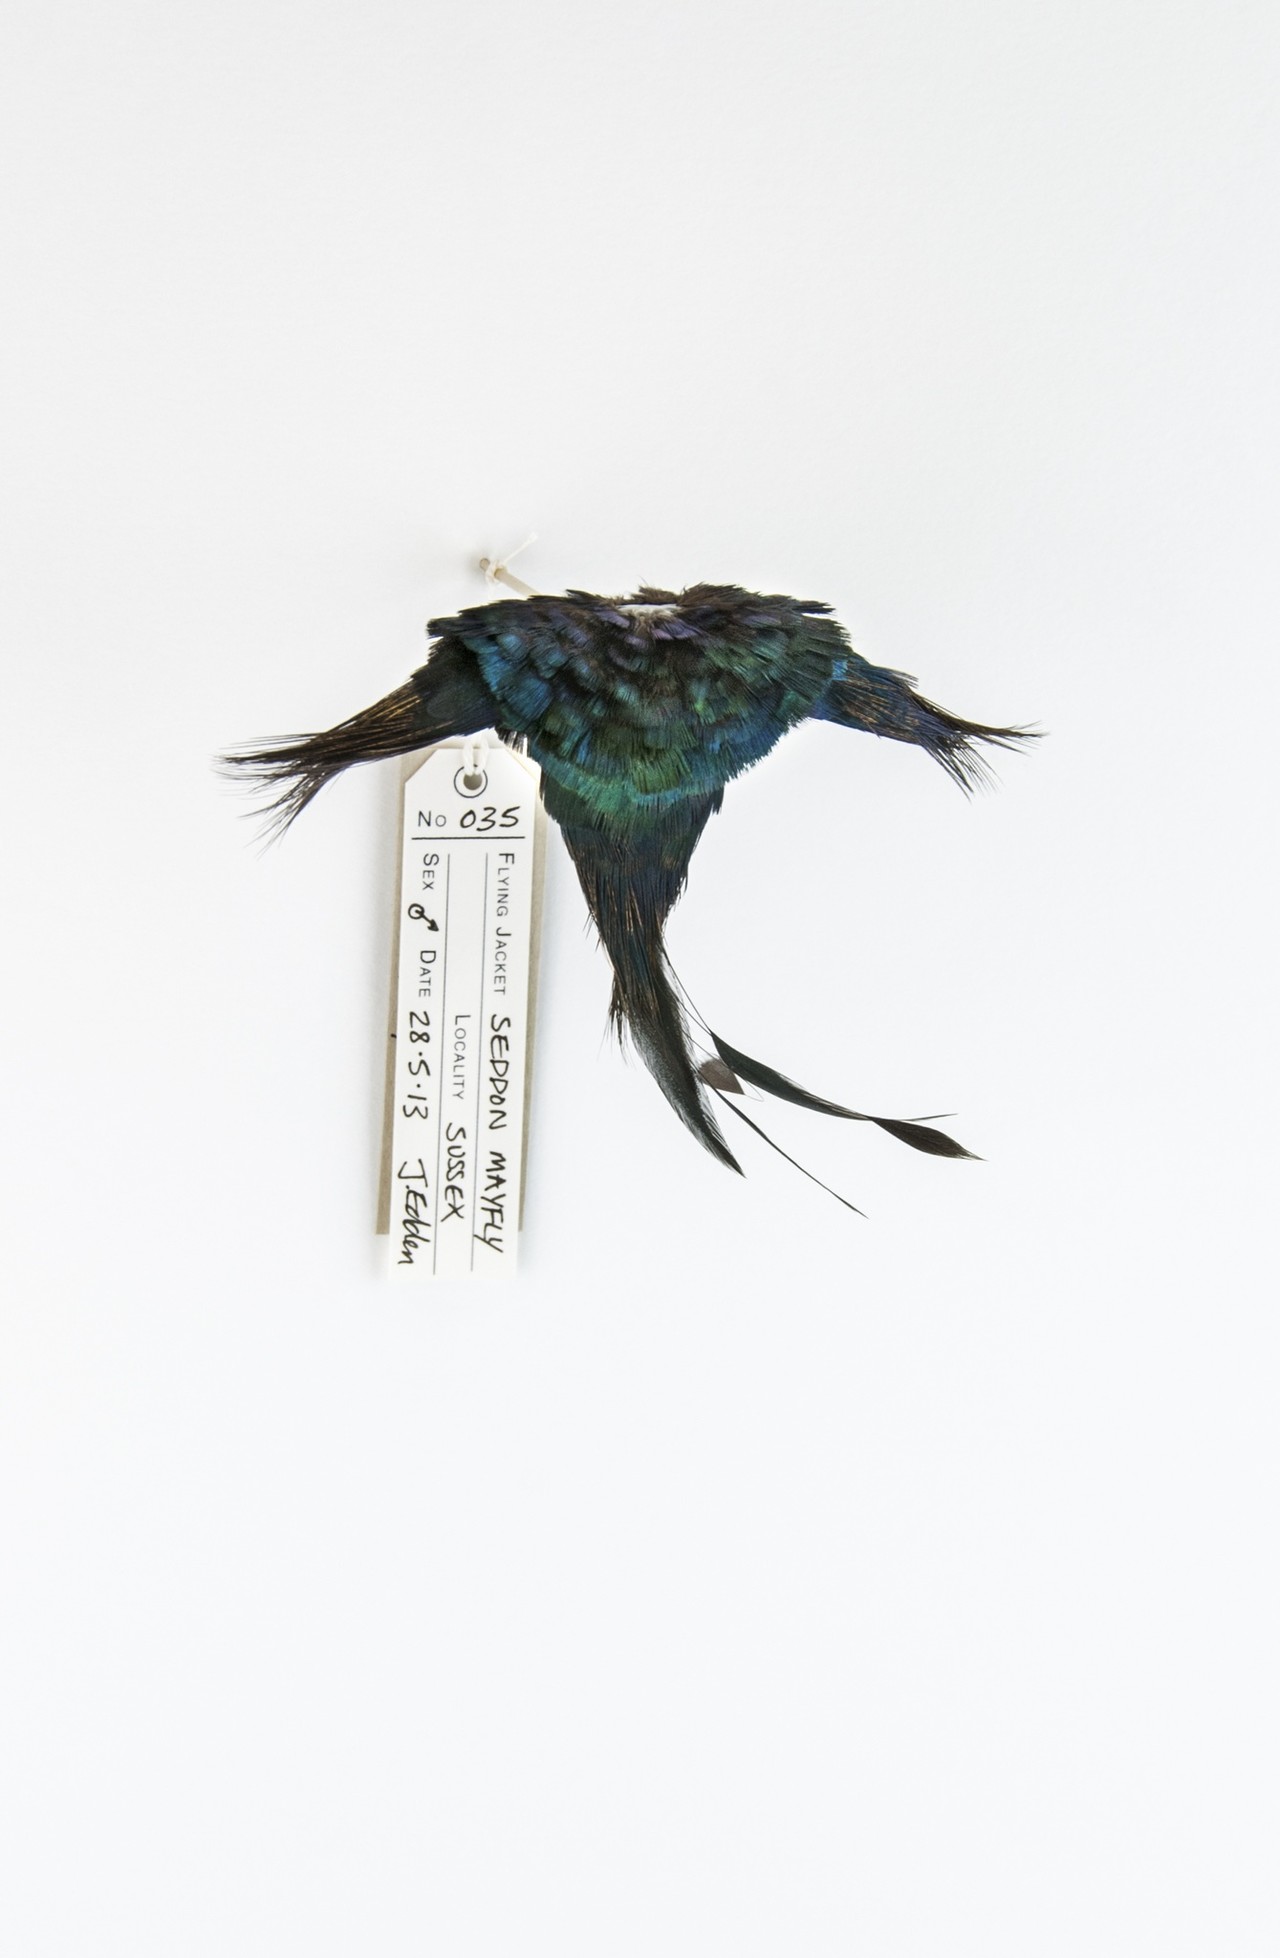 Jane Edden, Seddon Mayfly, 2014, Resin and male pheasant / chicken feathers in perspex case, 20 x 15 x 10 cm, JE 002